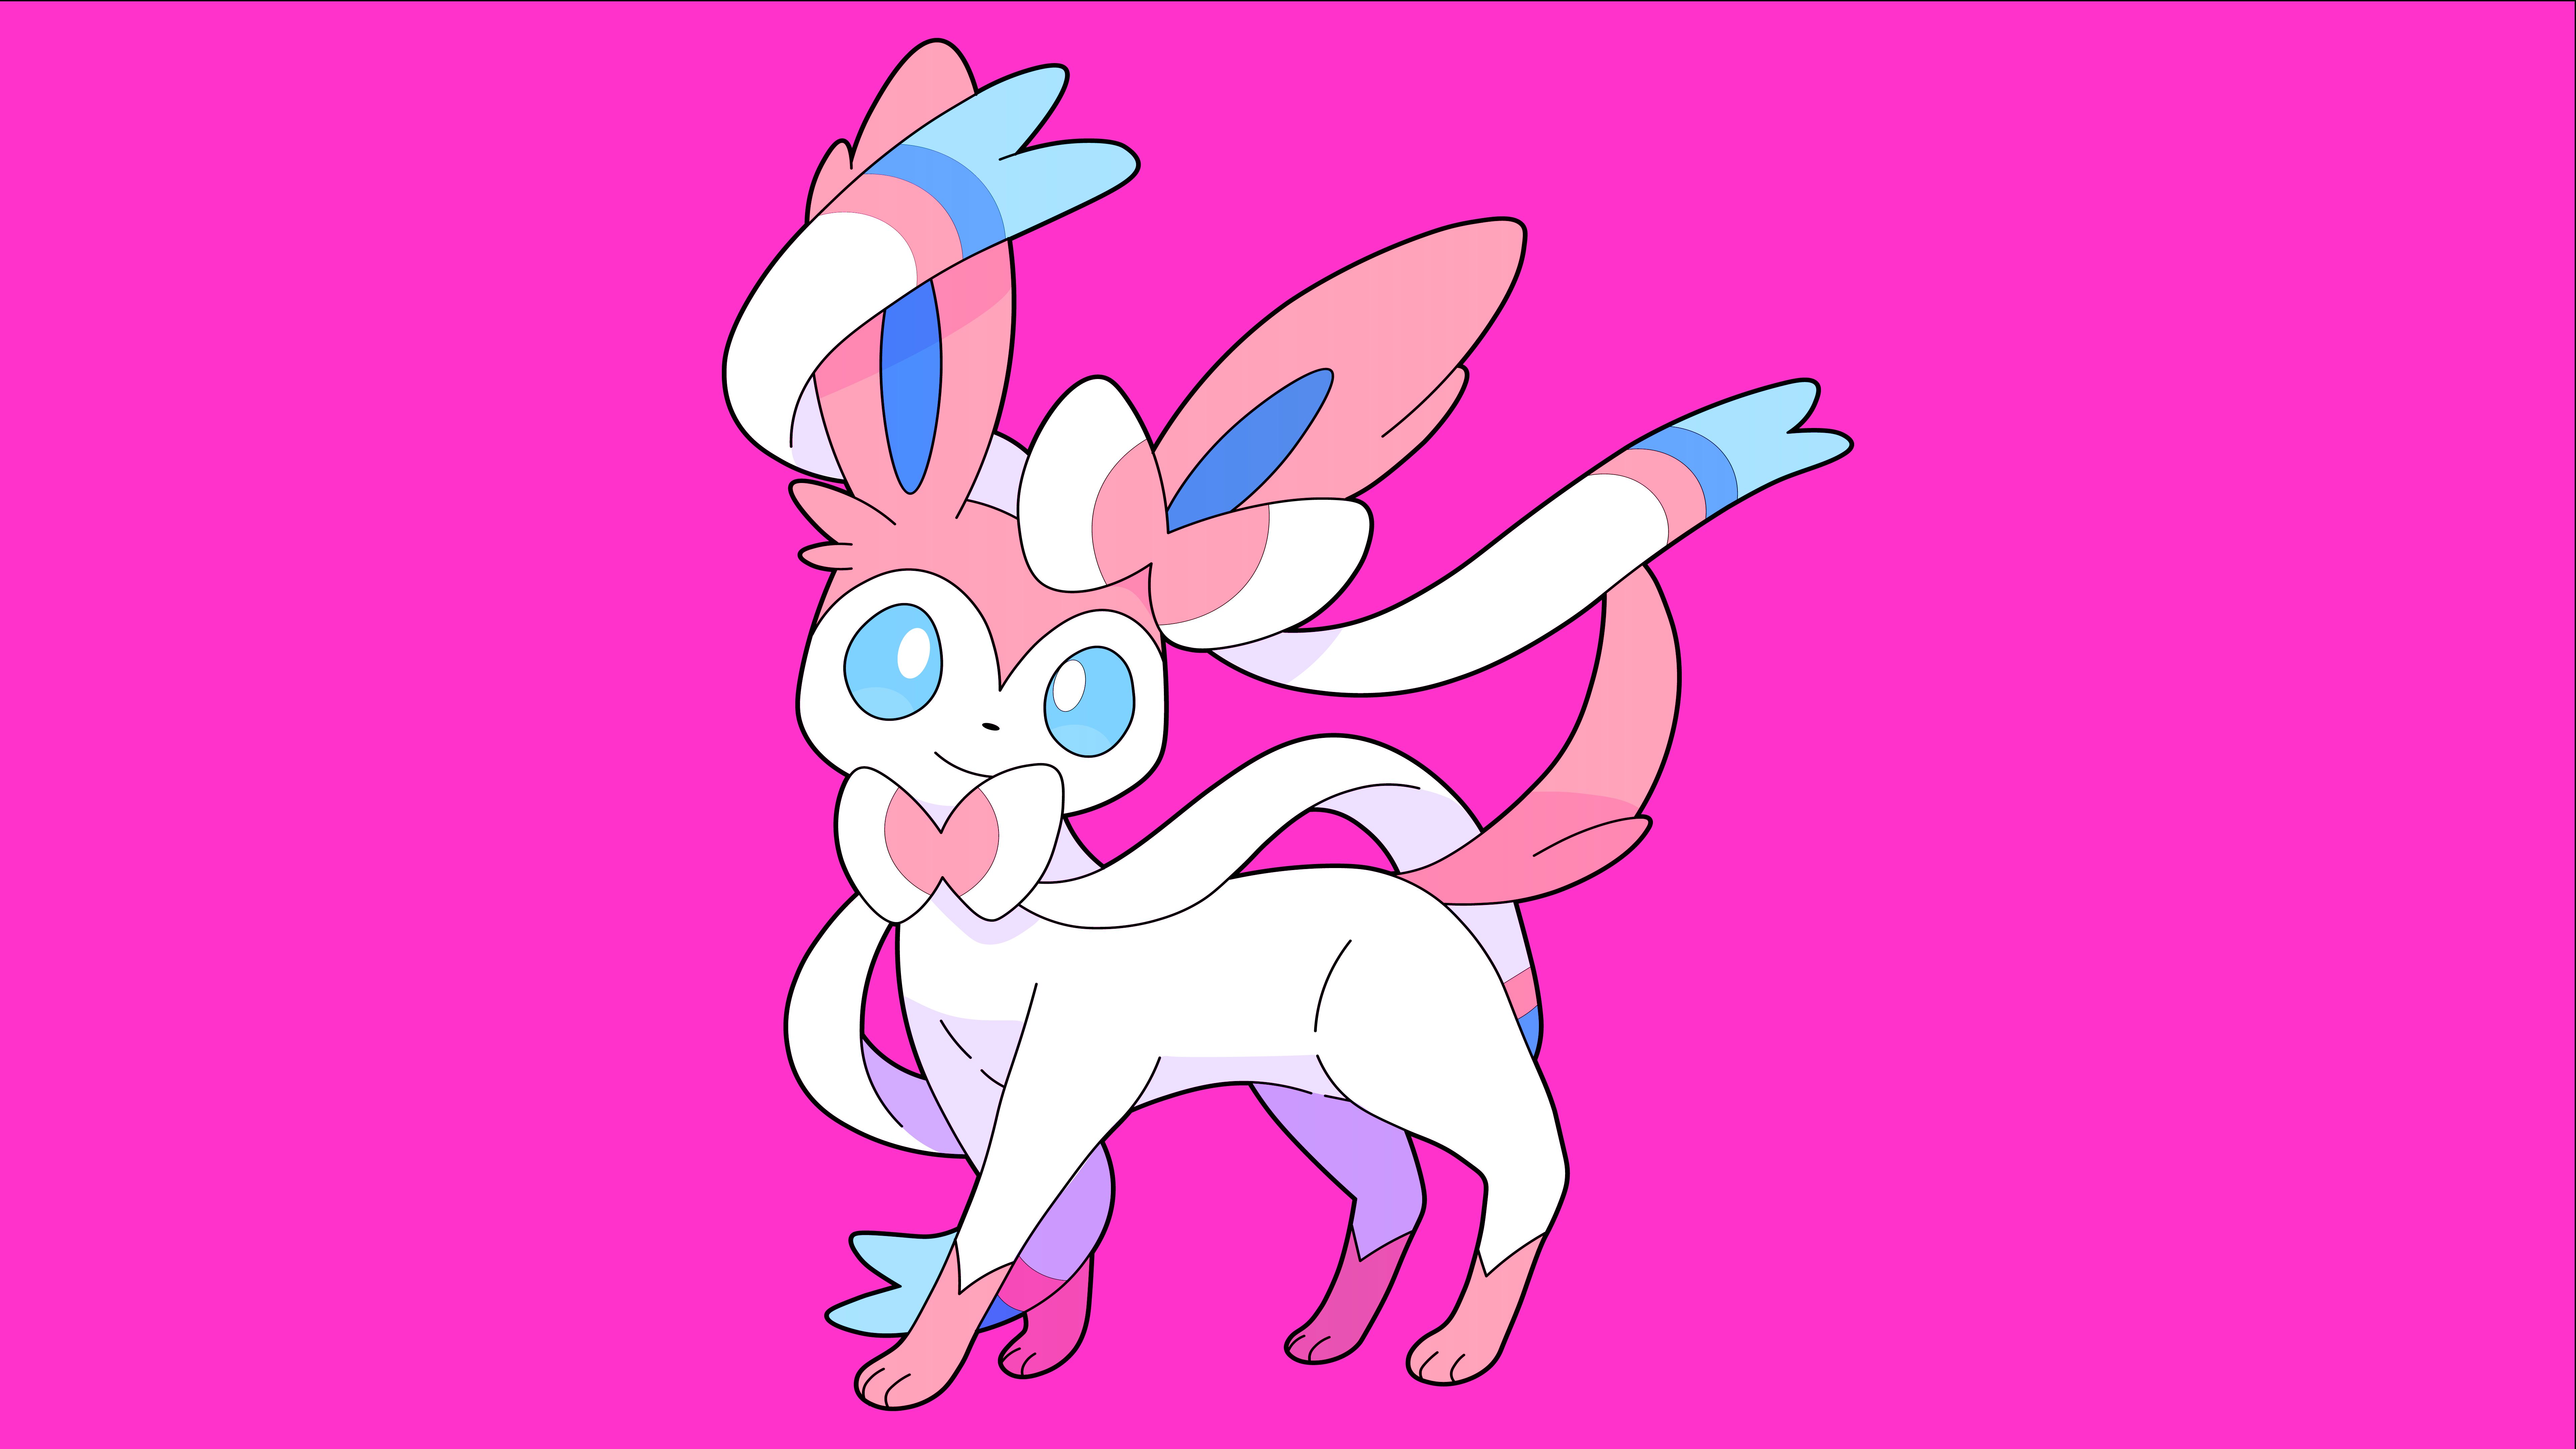 Sylveon Pokémon wallpapers for desktop download free Sylveon Pokémon  pictures and backgrounds for PC  moborg